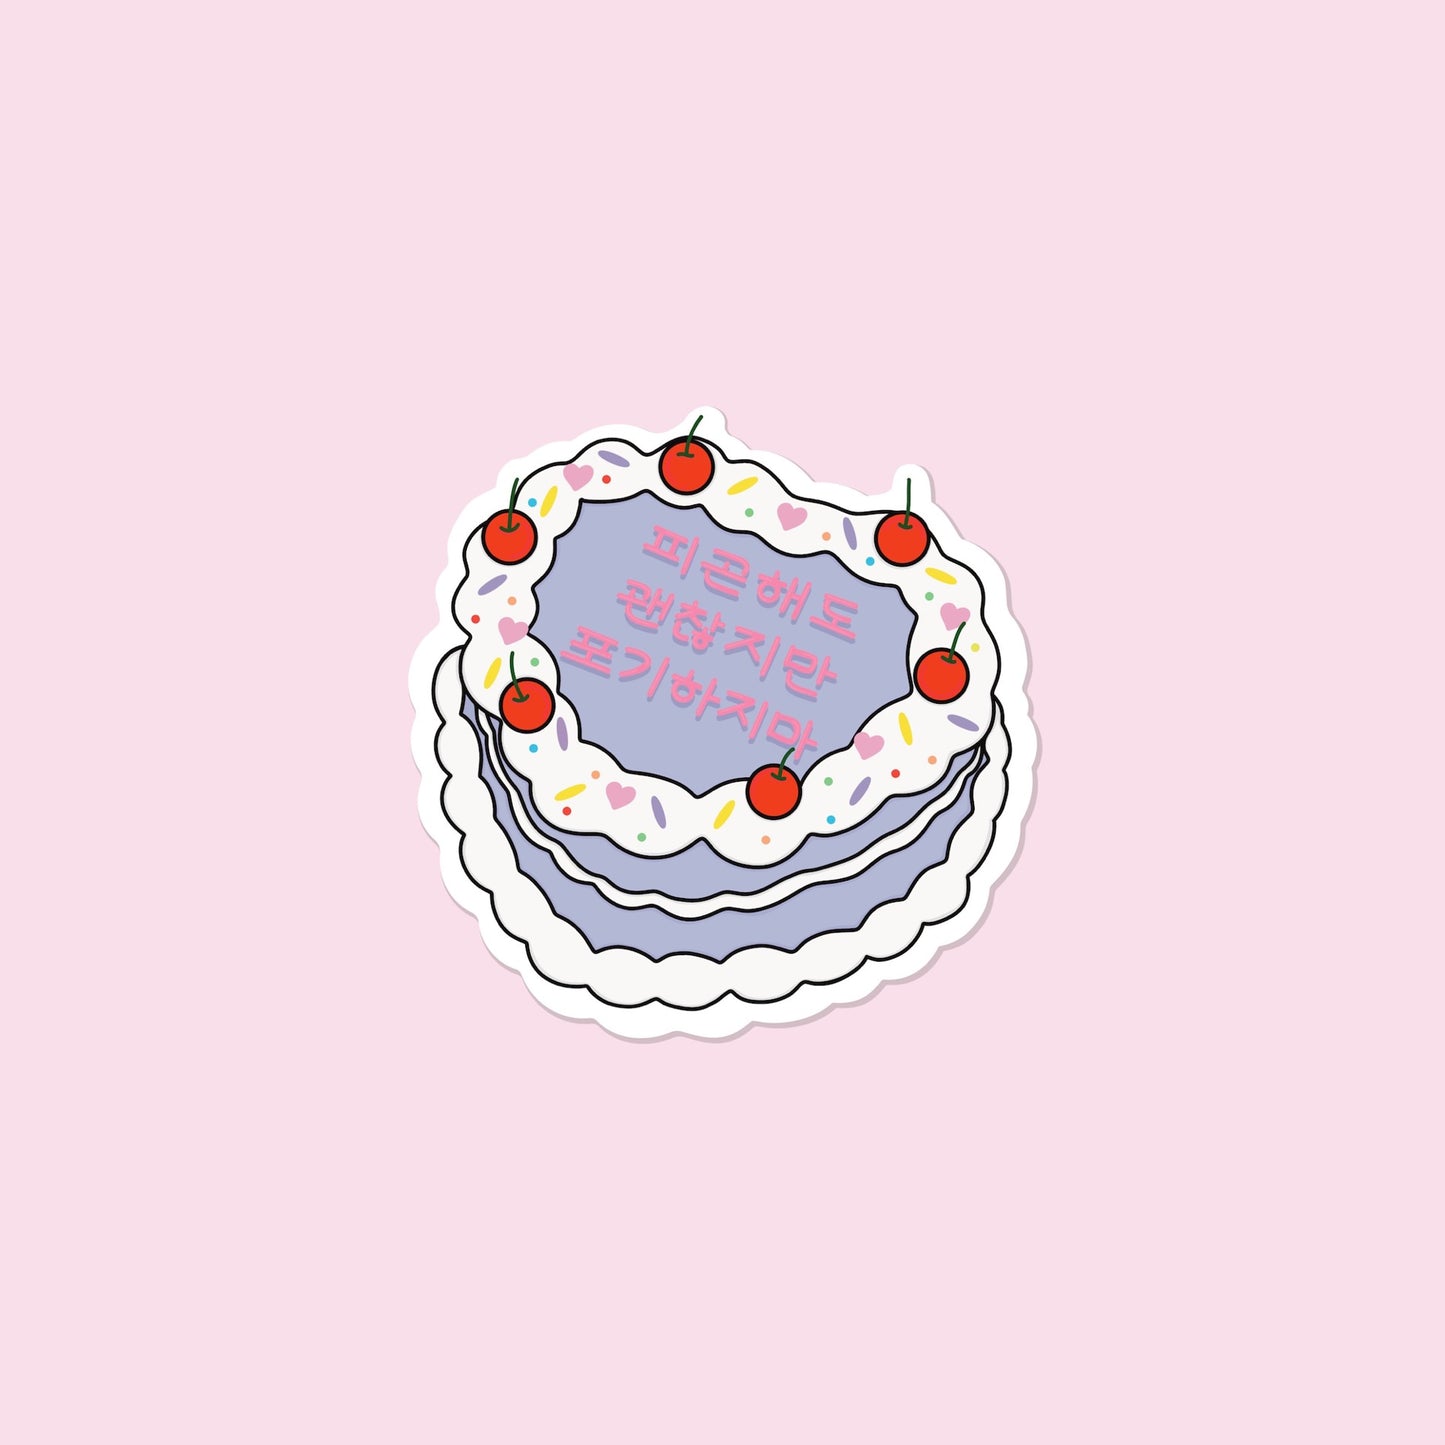 Don’t Give Up Cake Sticker